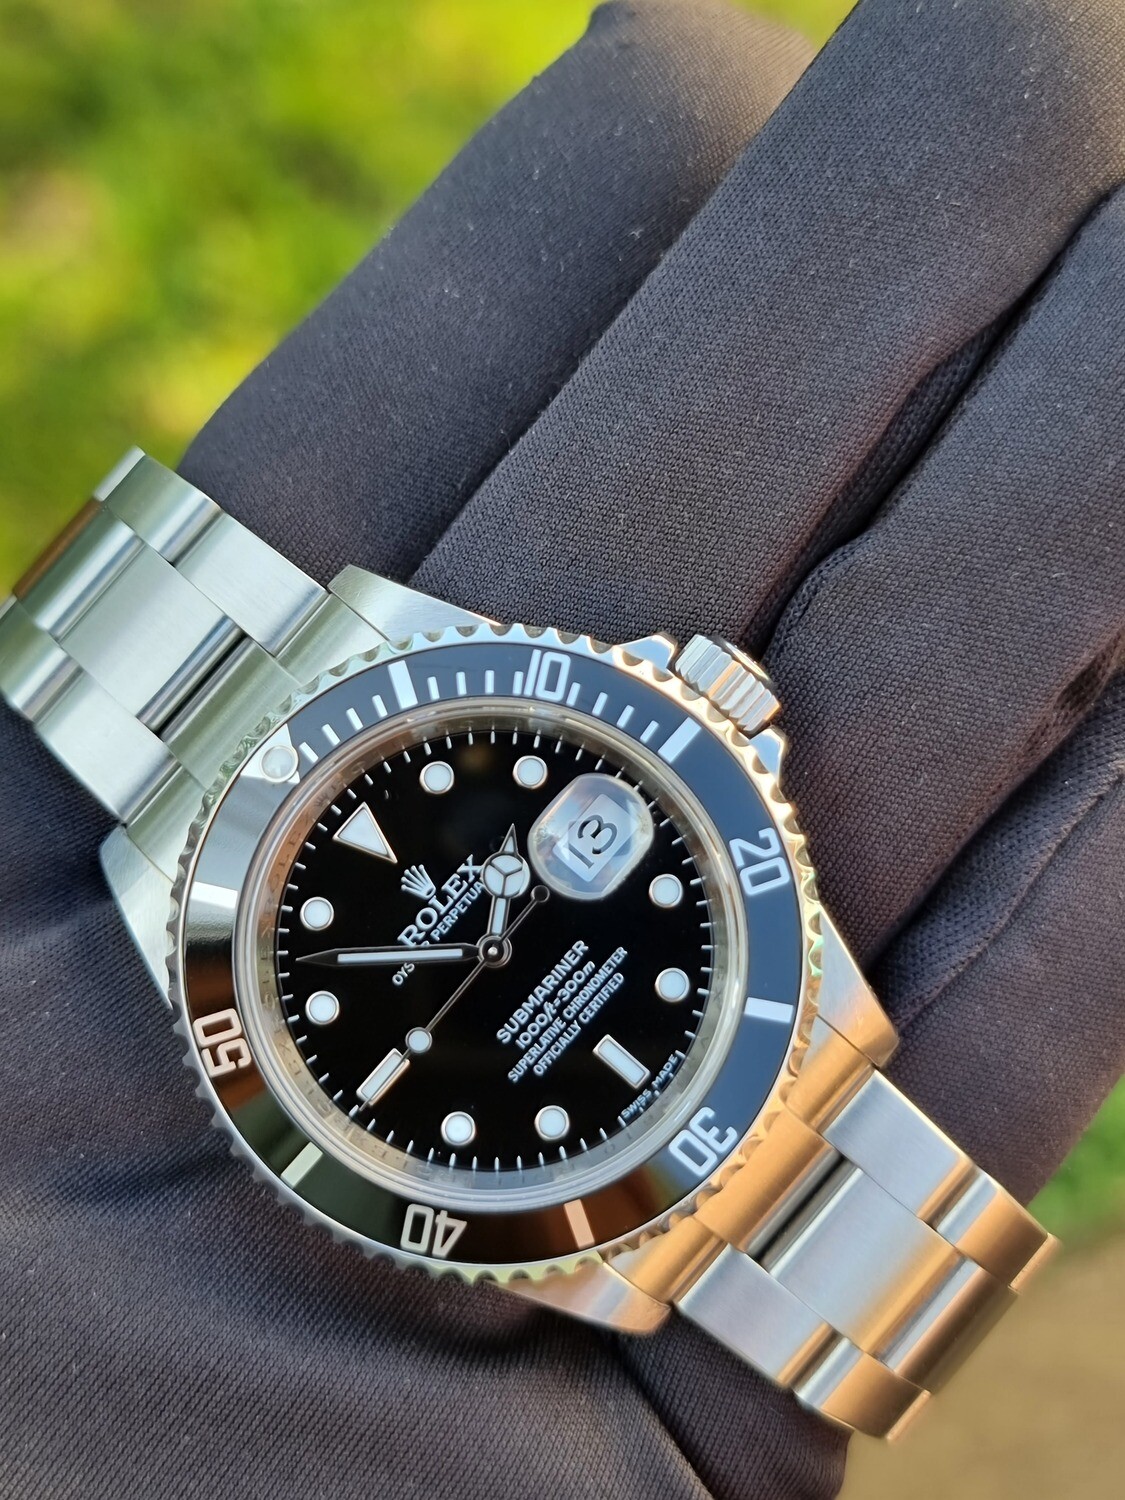 Rolex Submariner Date 16610, 2009 Full Set, Exceptional Condition Never Polished